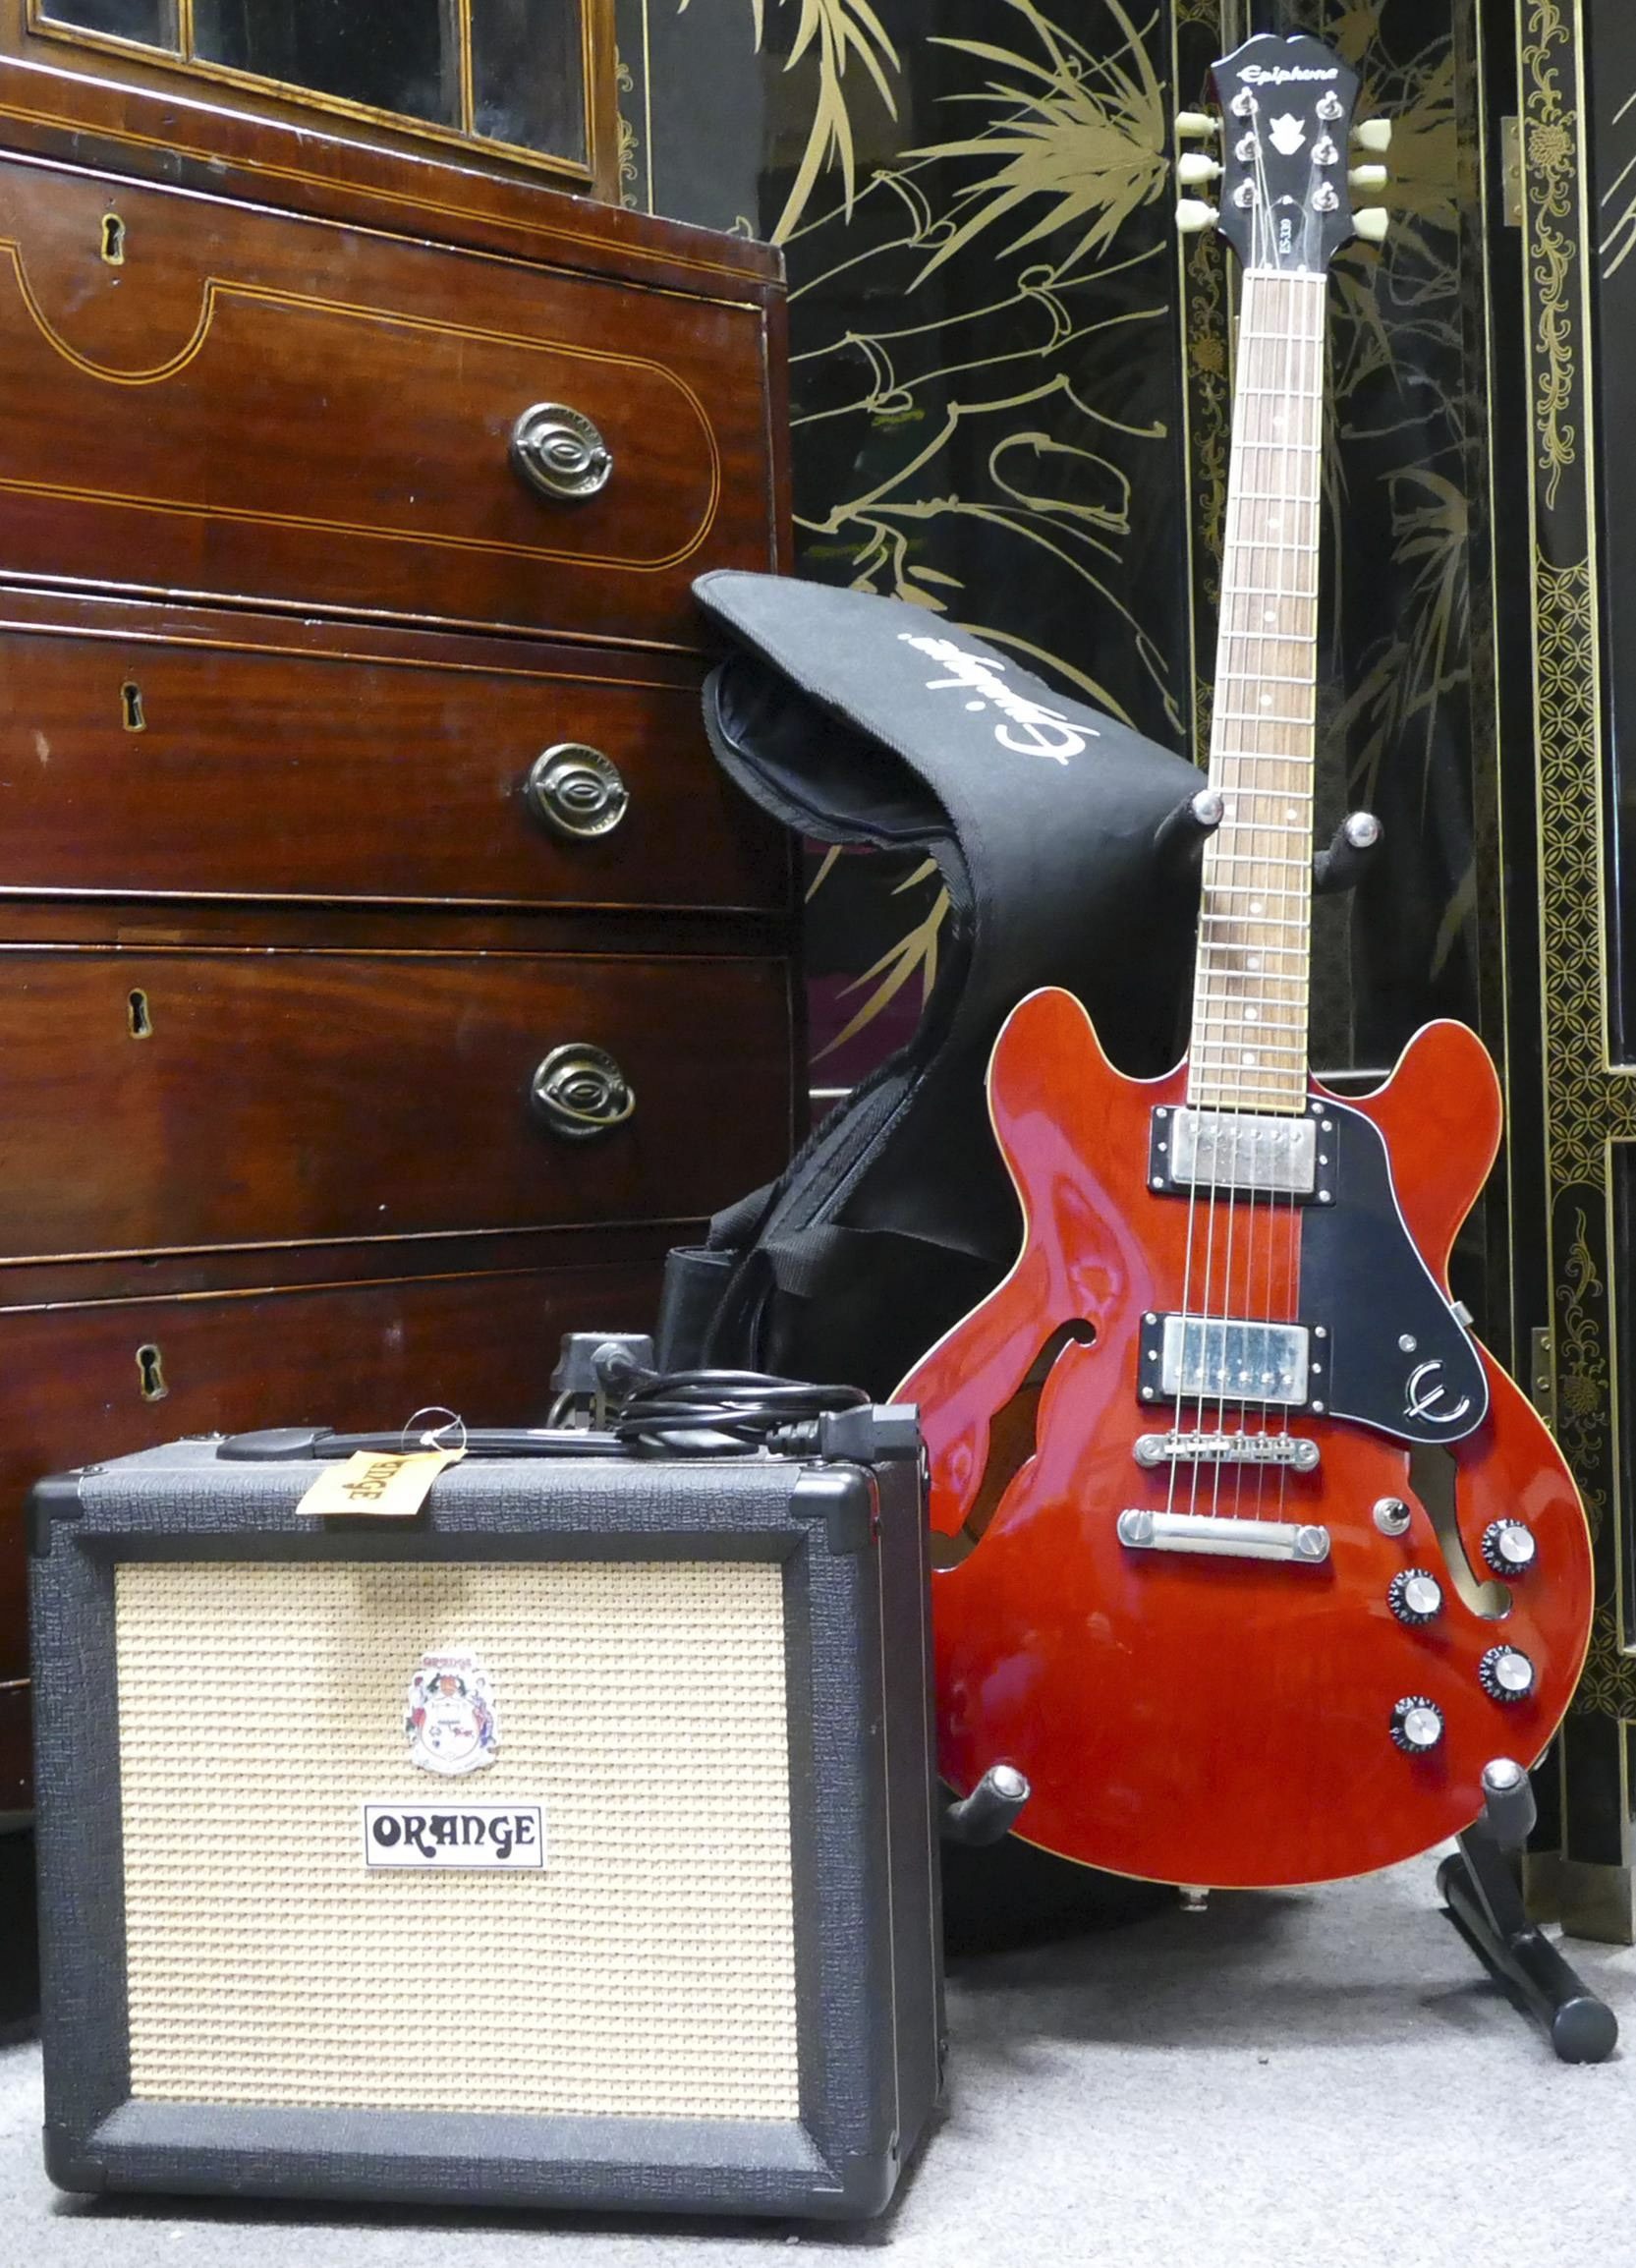 Lot 633 was an Epiphone guitar model ES 339 Ch in cherry red together with an Orange Crush 20 amplifier, complete with stand and lead, that found a new home for £280.